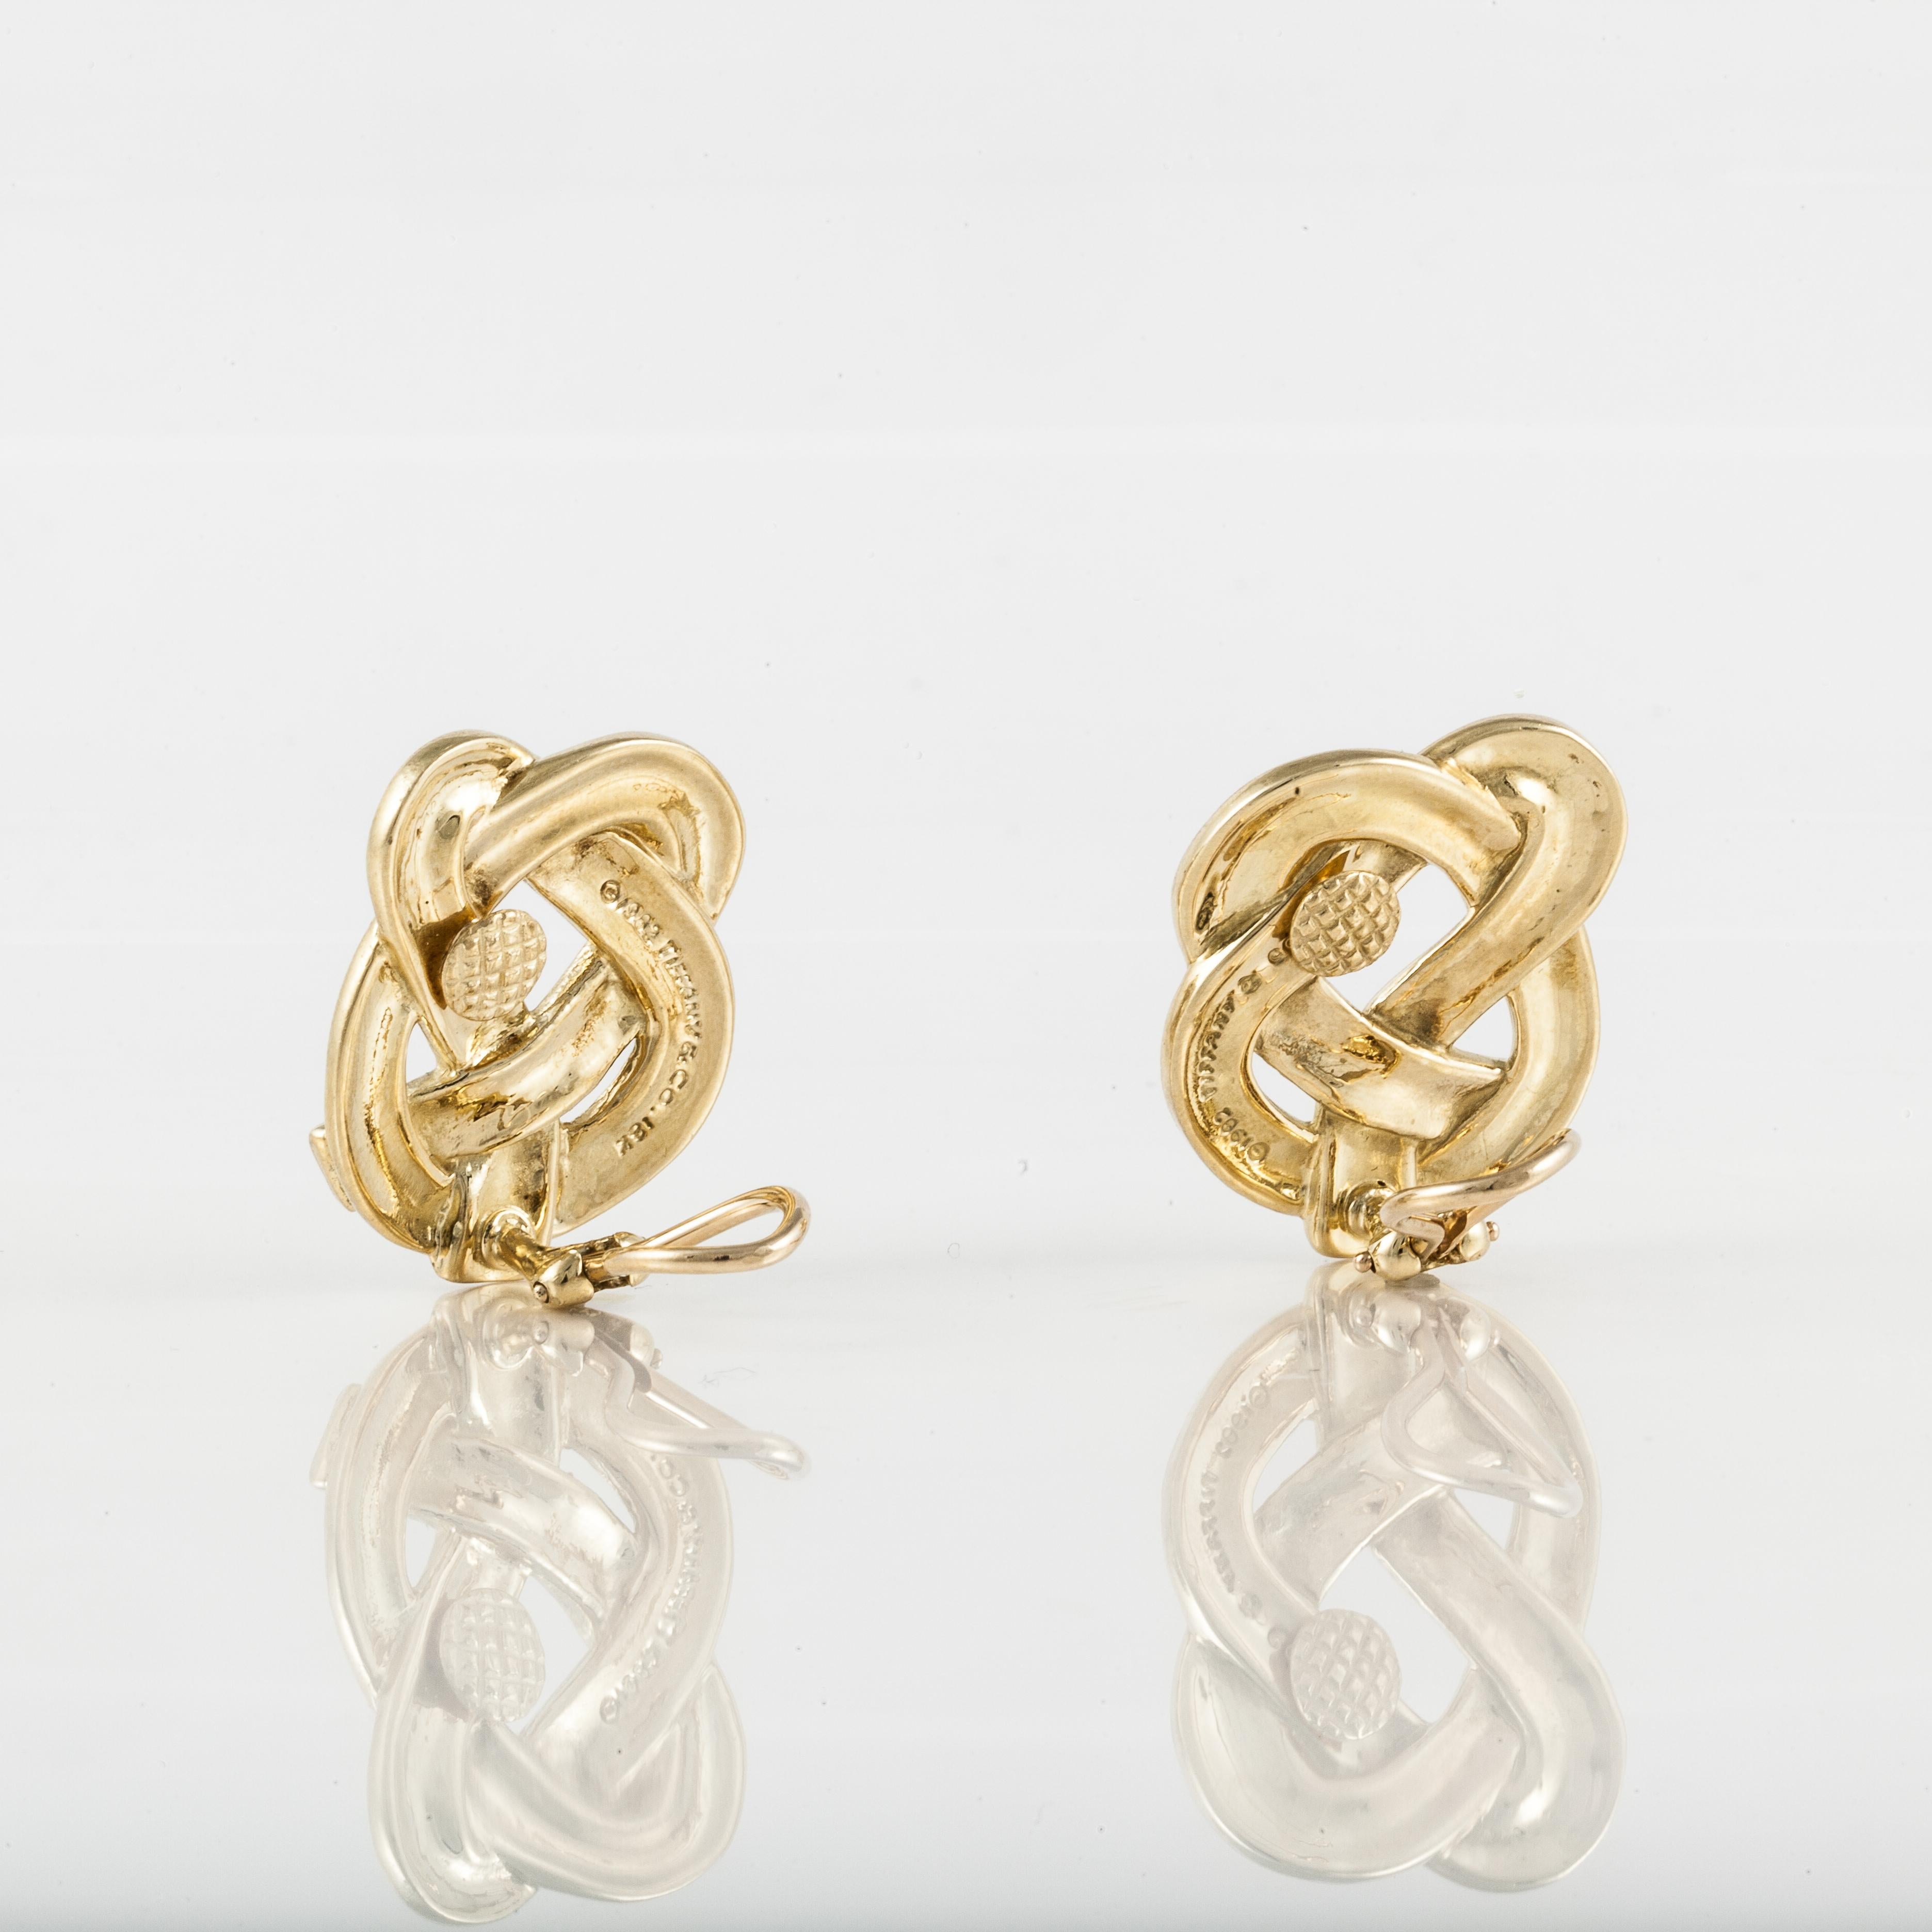 Pair of Angela Cummings for Tiffany & Co. earrings are crafted in 18K yellow gold with a pretzel twist design.  Dated 1982.  They measure 1 inch long and 7/8 inches wide.  Clip style.